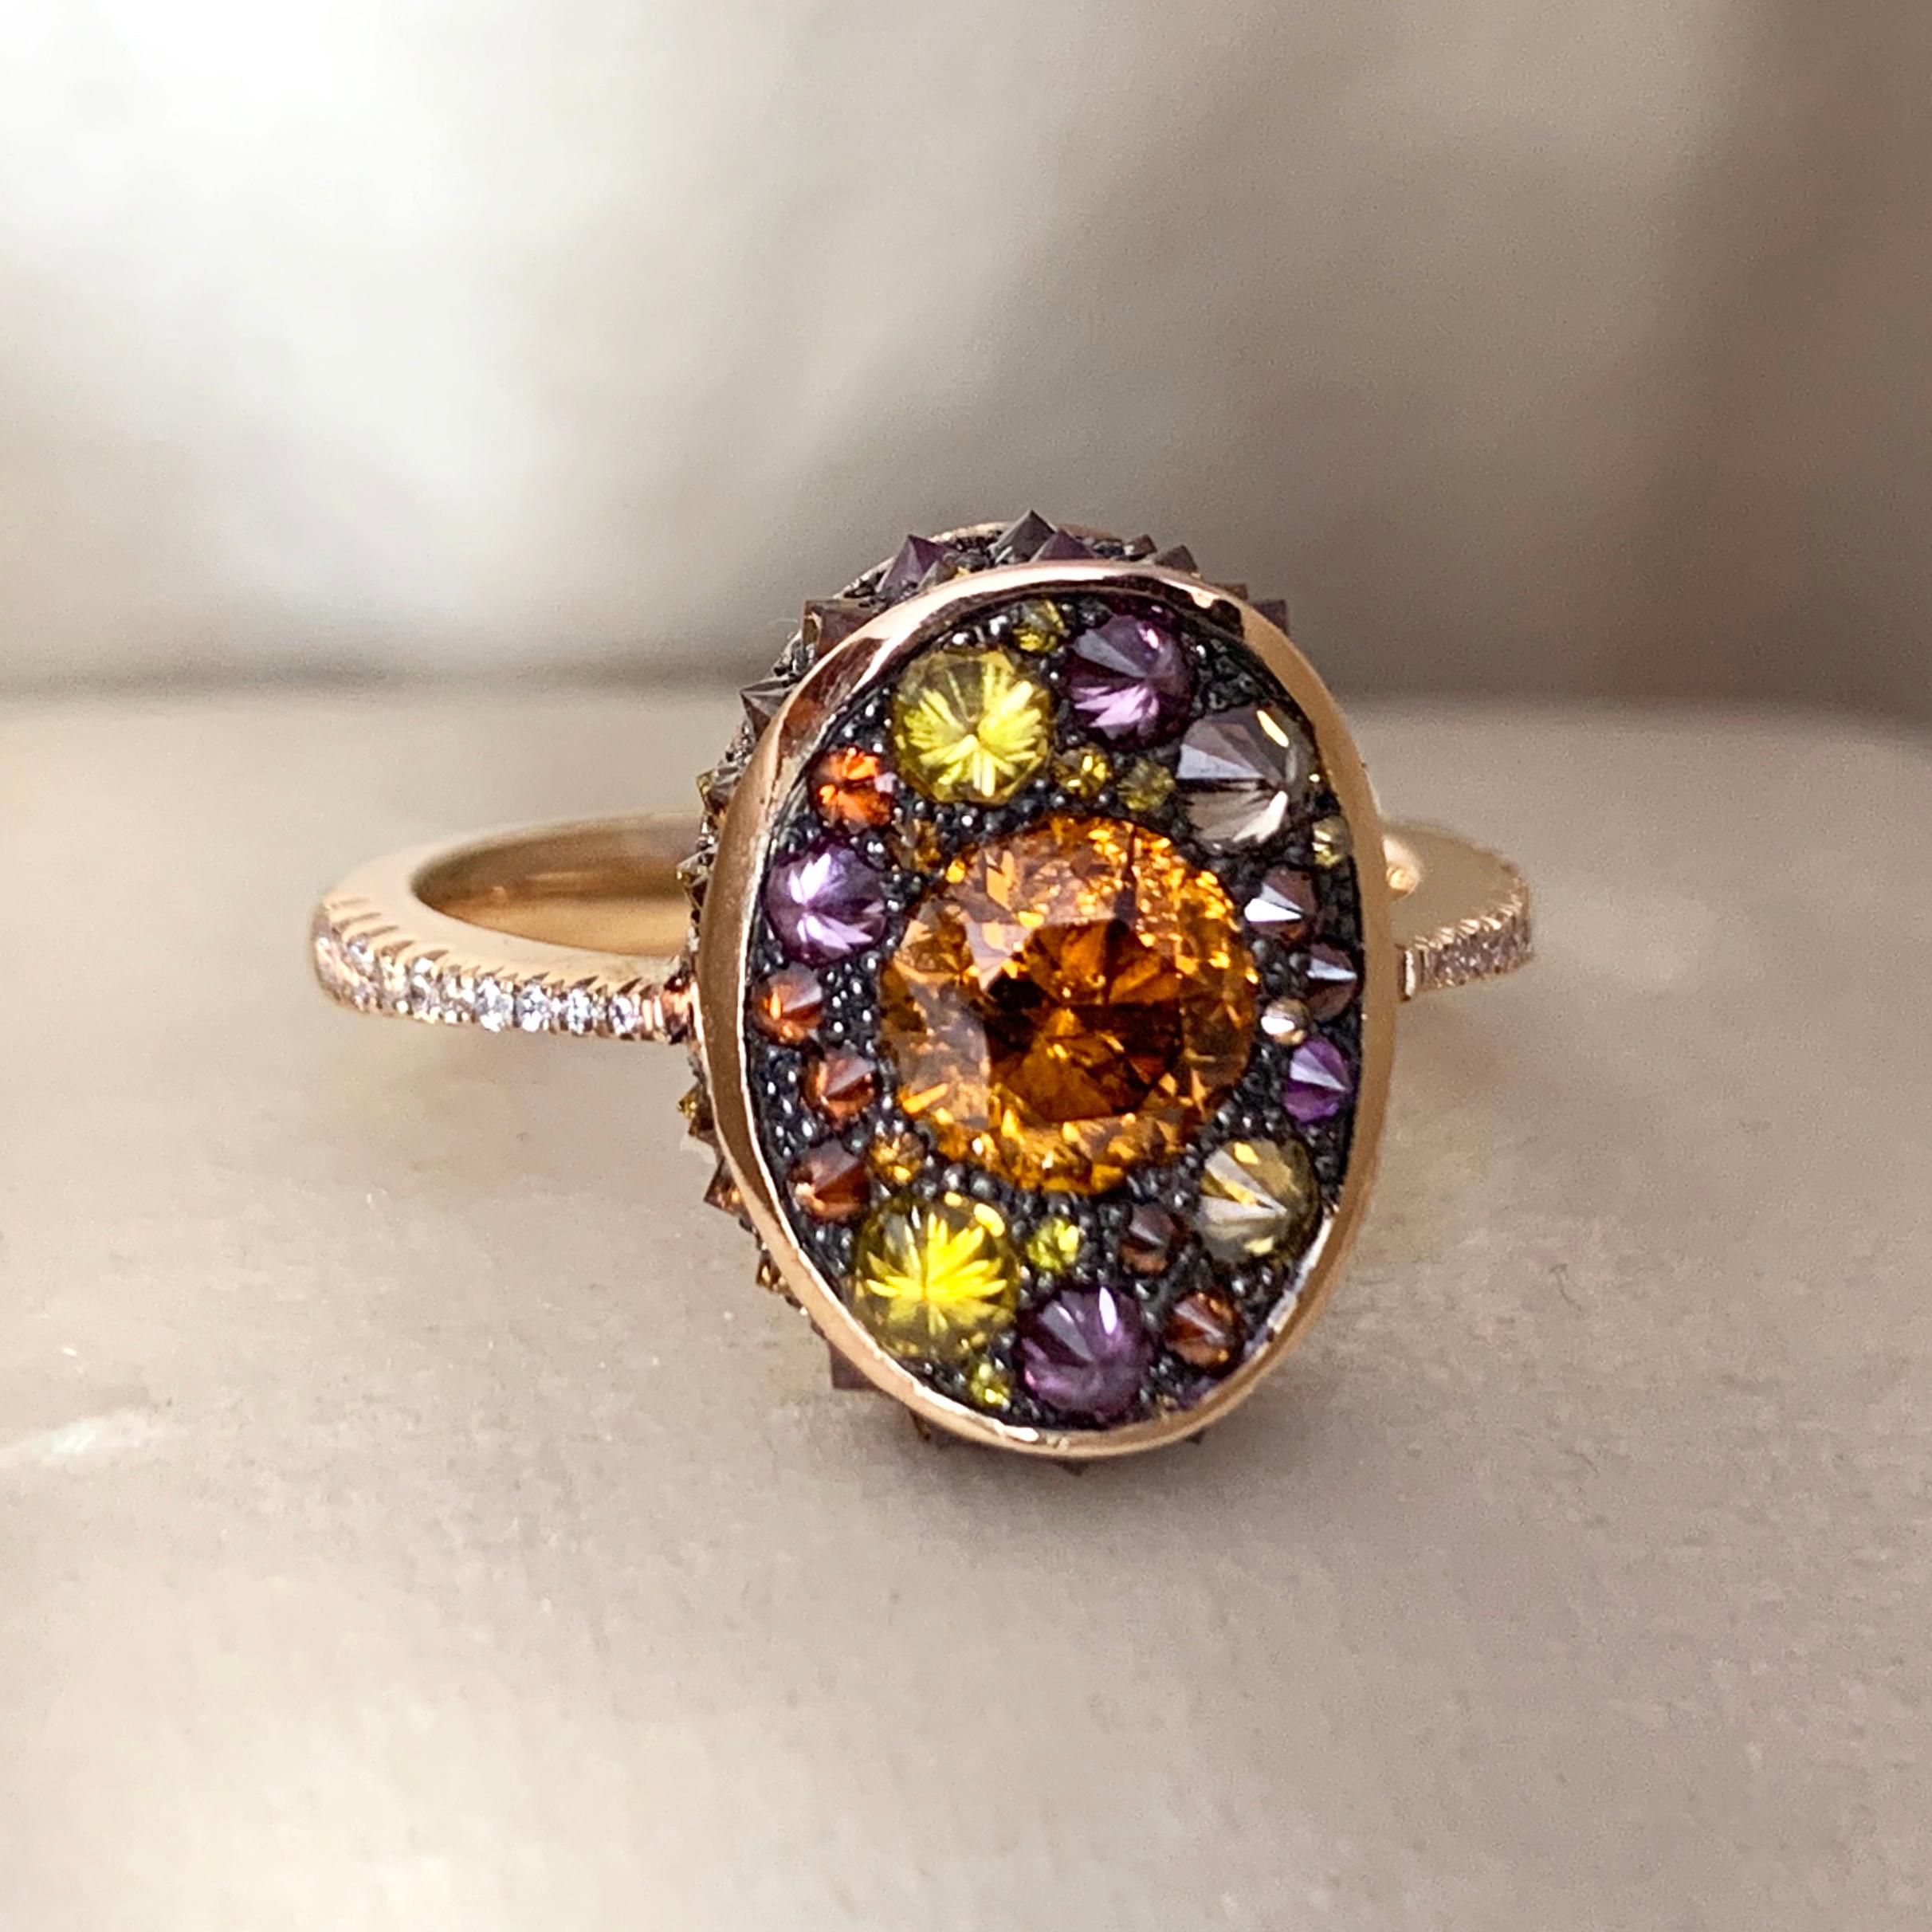 One of a kind ring handmade in Belgium in 2017 by jewellery artist Joke Quick, in 18K Rose gold 4,7 g & blackened sterling silver 1,8 g (The stones are set on silver to create a black background for the stones). Fancy Intense orange brilliant-cut